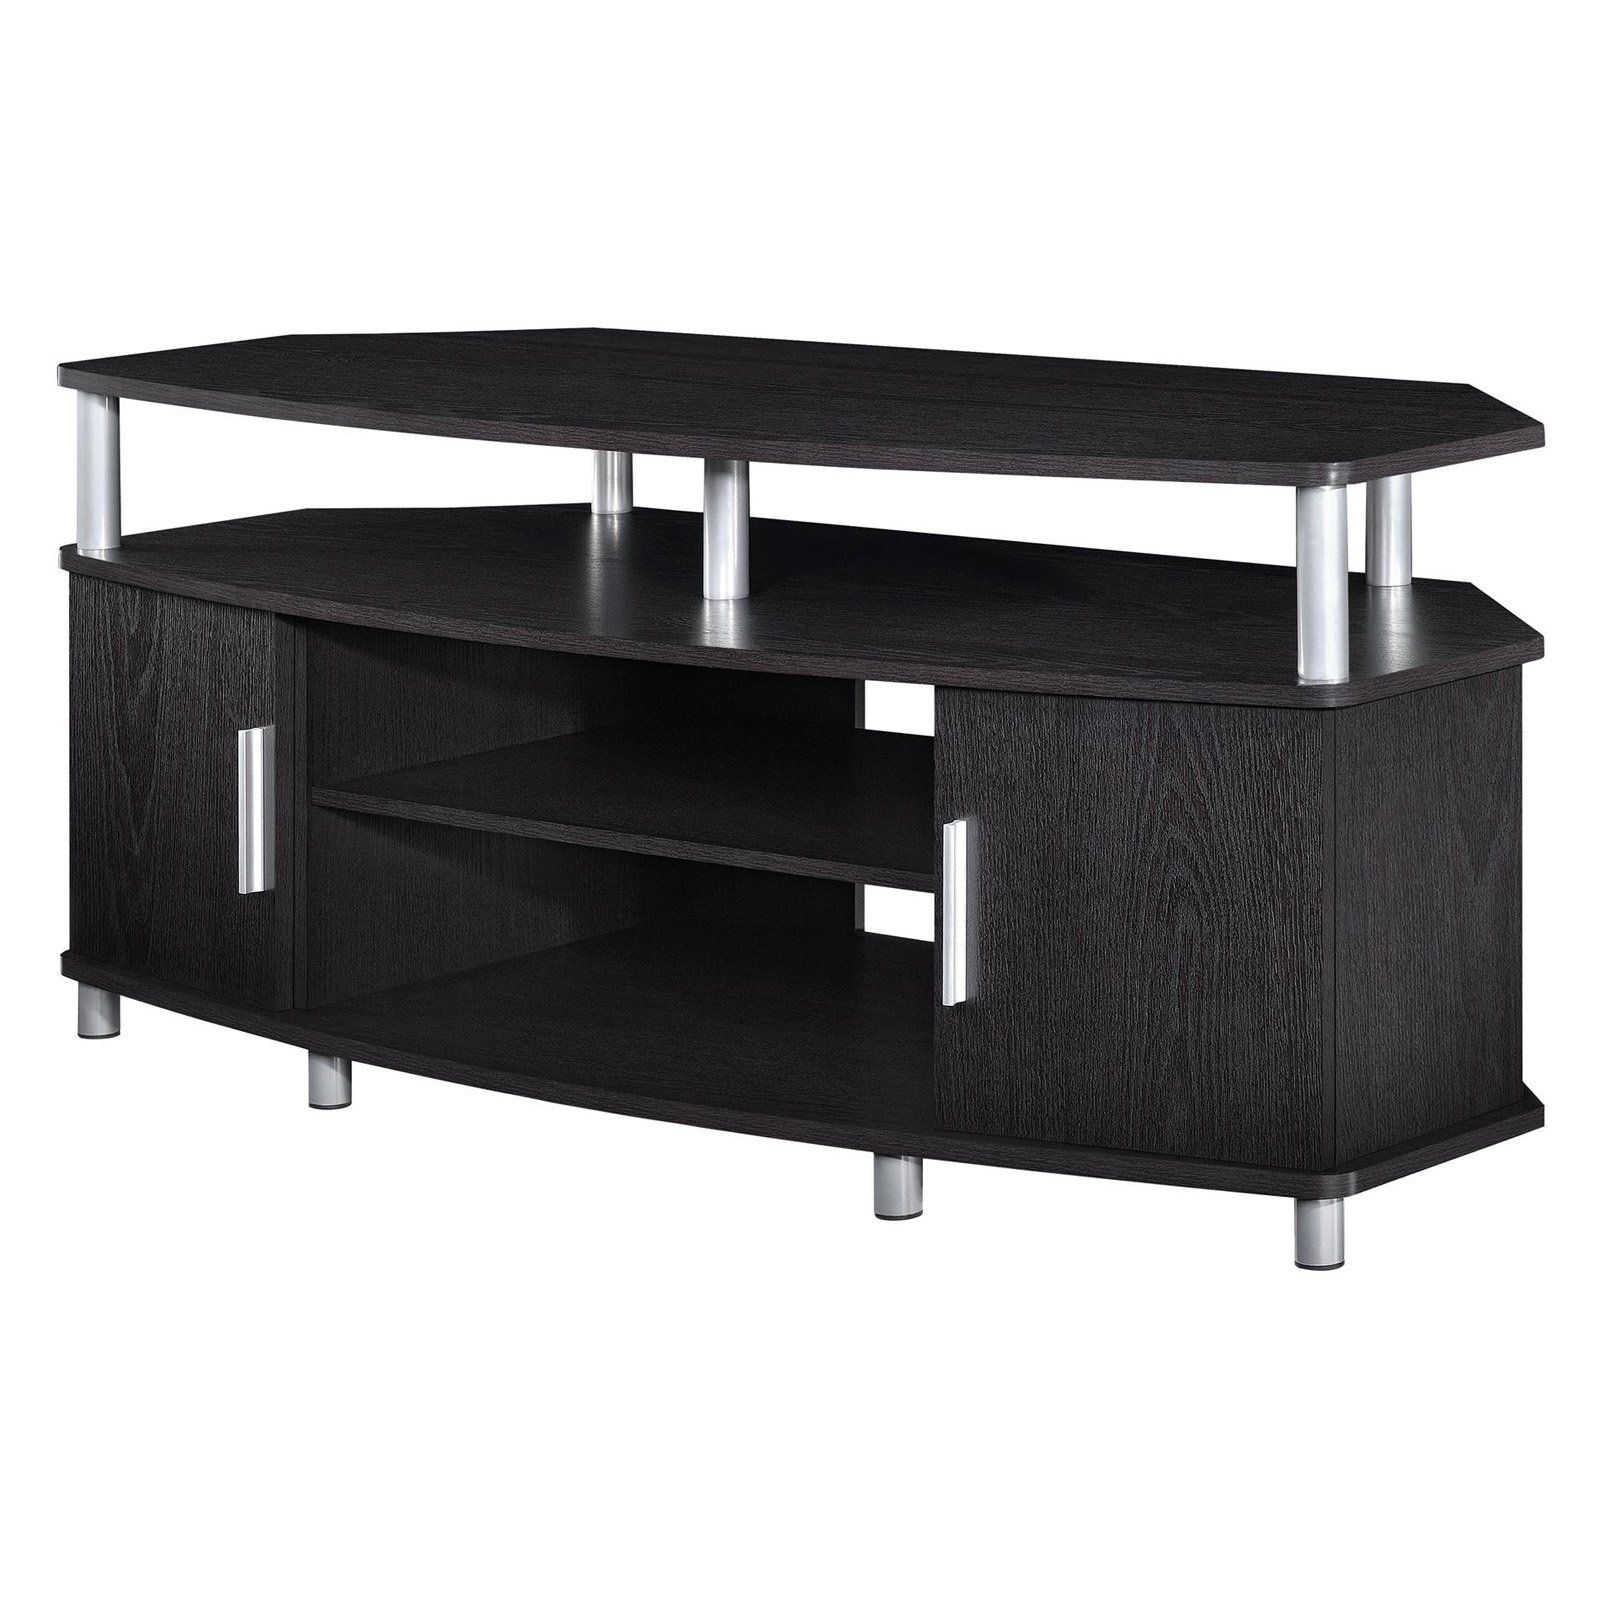 Ameriwood Home Carson Corner Tv Stand For Tvs Up To 50 Inside Tracy Tv Stands For Tvs Up To 50" (View 10 of 20)